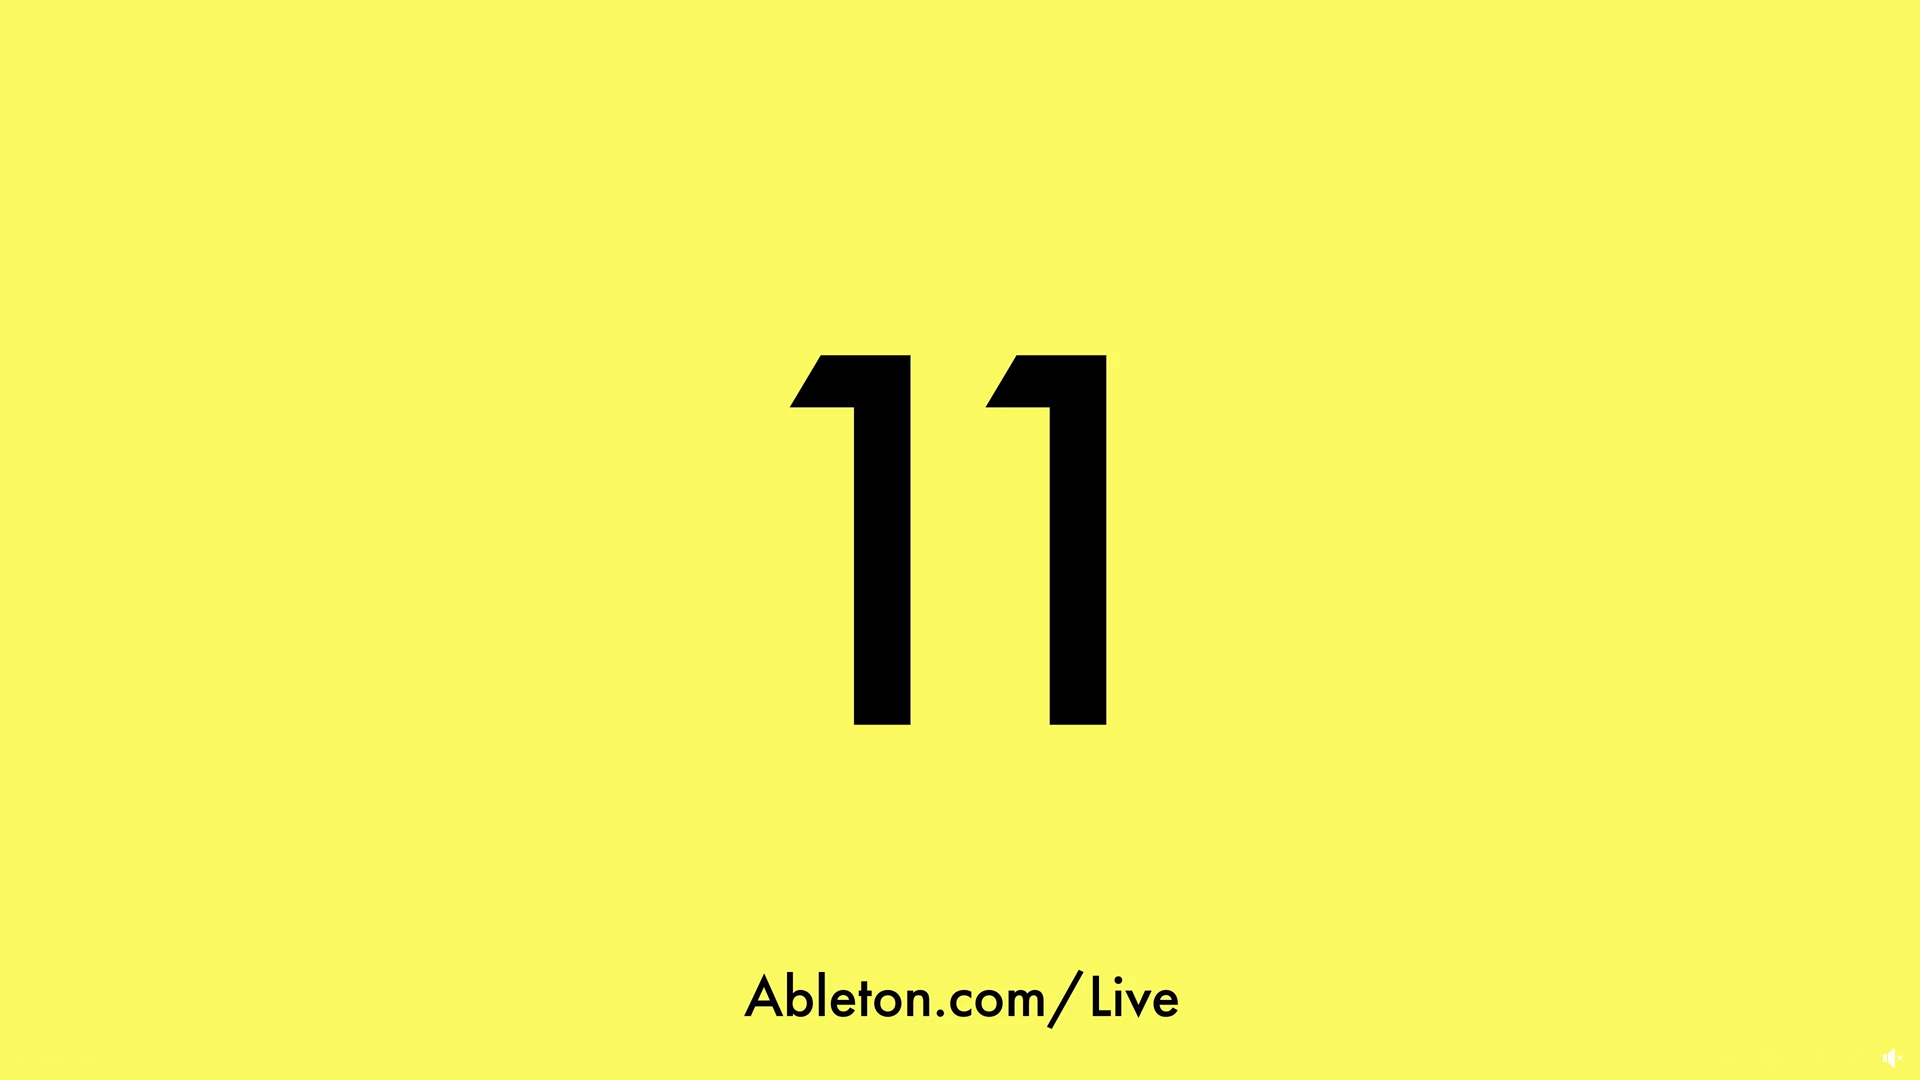 Get Ableton Live 10 for 20% with a free upgrade to Live 11